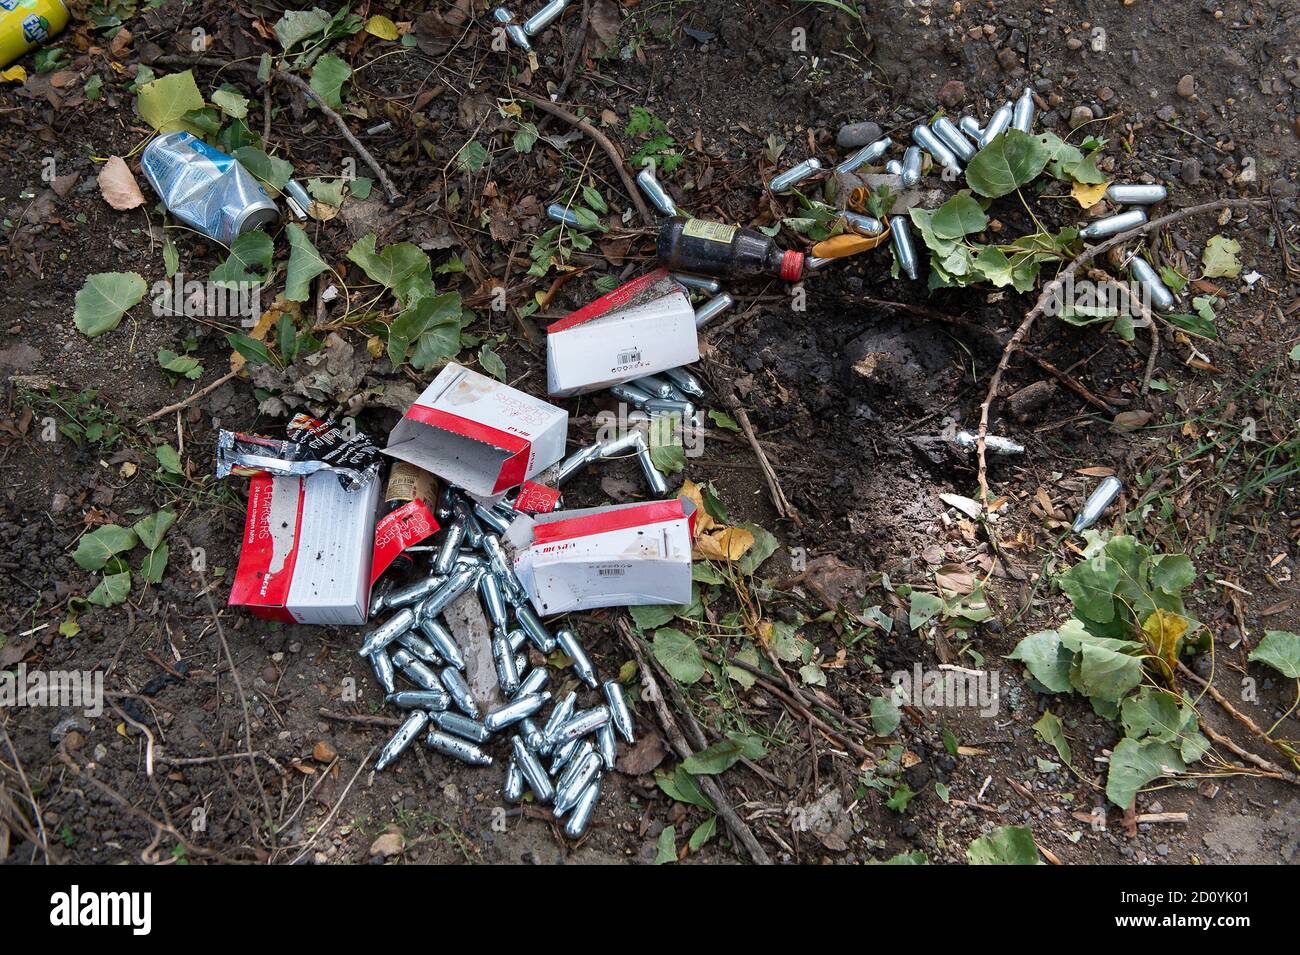 Uxbridge, Middlesex, UK. 28th September, 2020. Discarded cream chargers by the side of a road in Uxbridge. The use of Nitrous Oxide cream chargers by youths as recreational drugs often referred to as hippy crack or laughing gas, has increased substantially since the Coronavirus lockdown started. Inhalation of the Nitrous Oxide gas from cream chargers that are meant to be used for culinary purposes, can be lethal as the gas may cause a spasm and stop a person from breathing or cause nerve damage to the body. Credit: Maureen McLean/Alamy Stock Photo